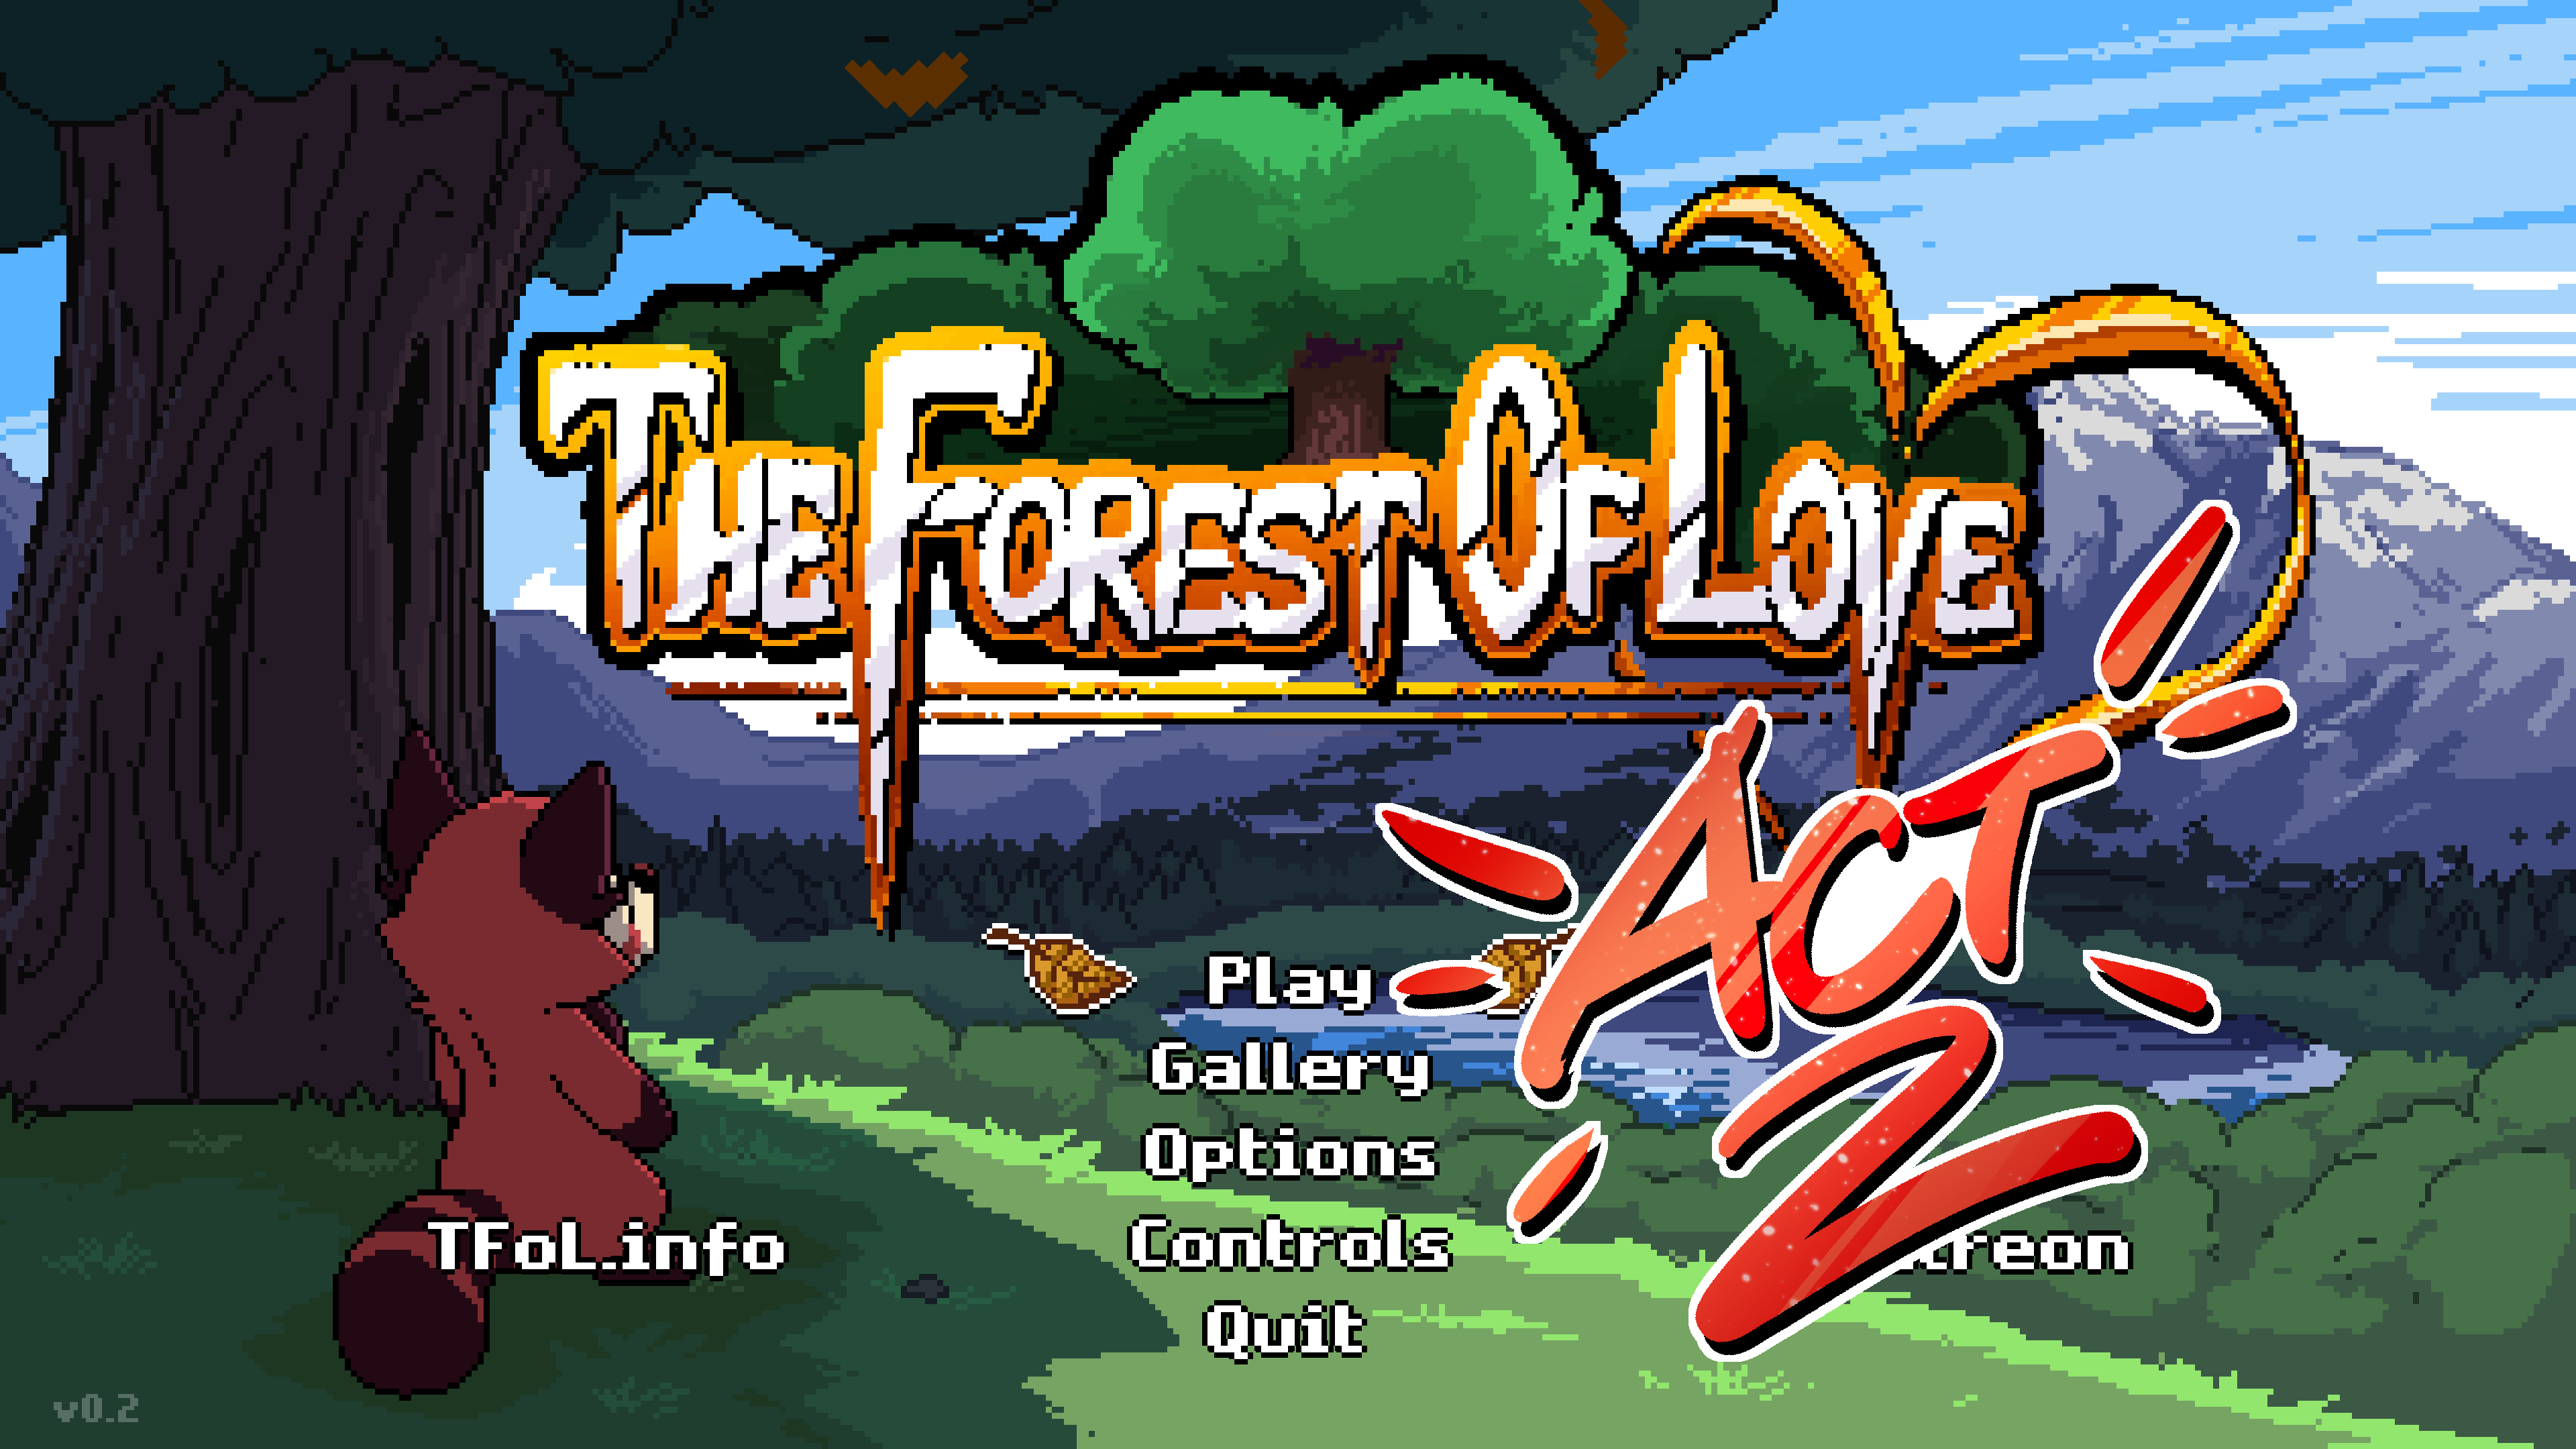 Melody Love Fuck - The Forest of Love by Carrot